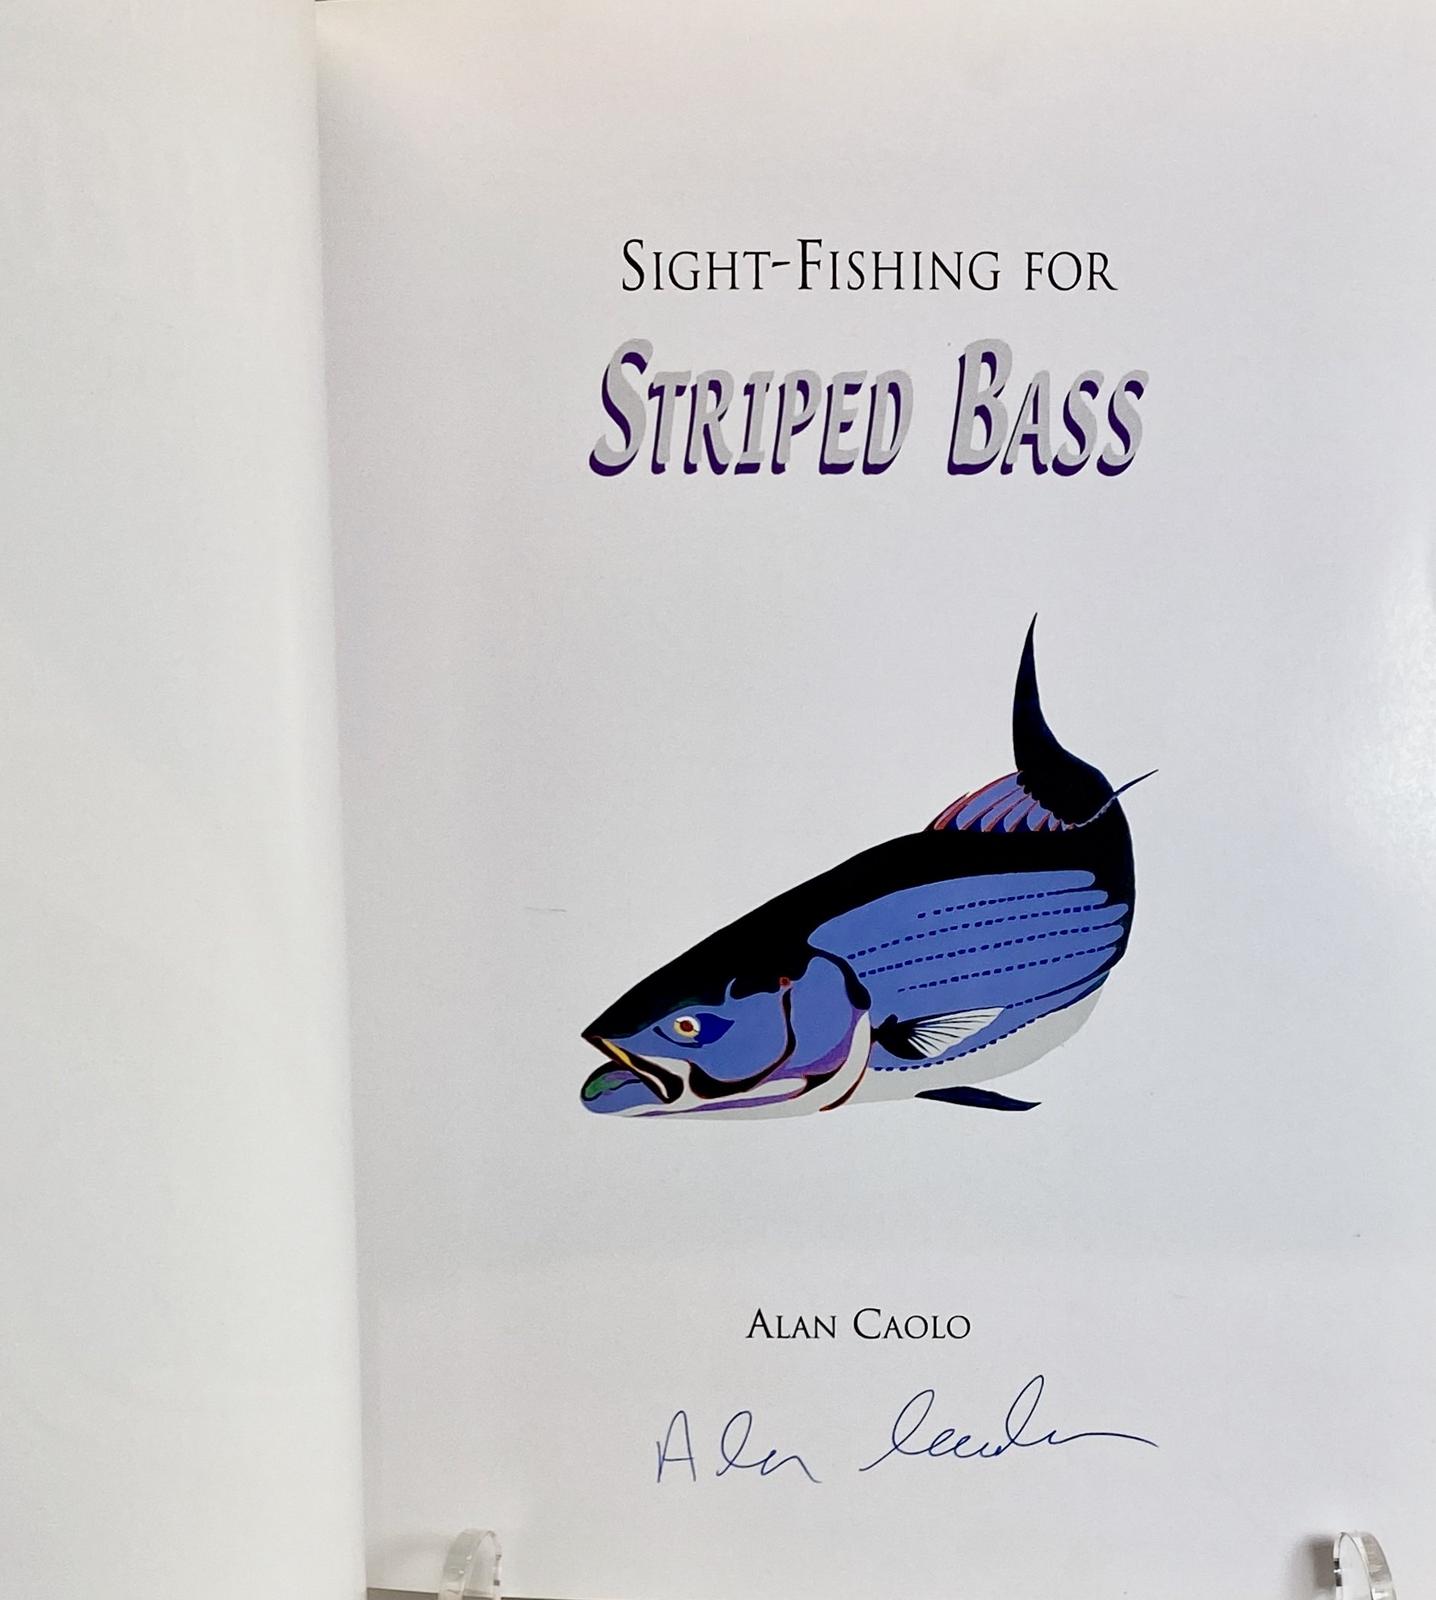 5 STRIPED BASS ITEMS W/SIGNED BOOK BY AUTHOR!